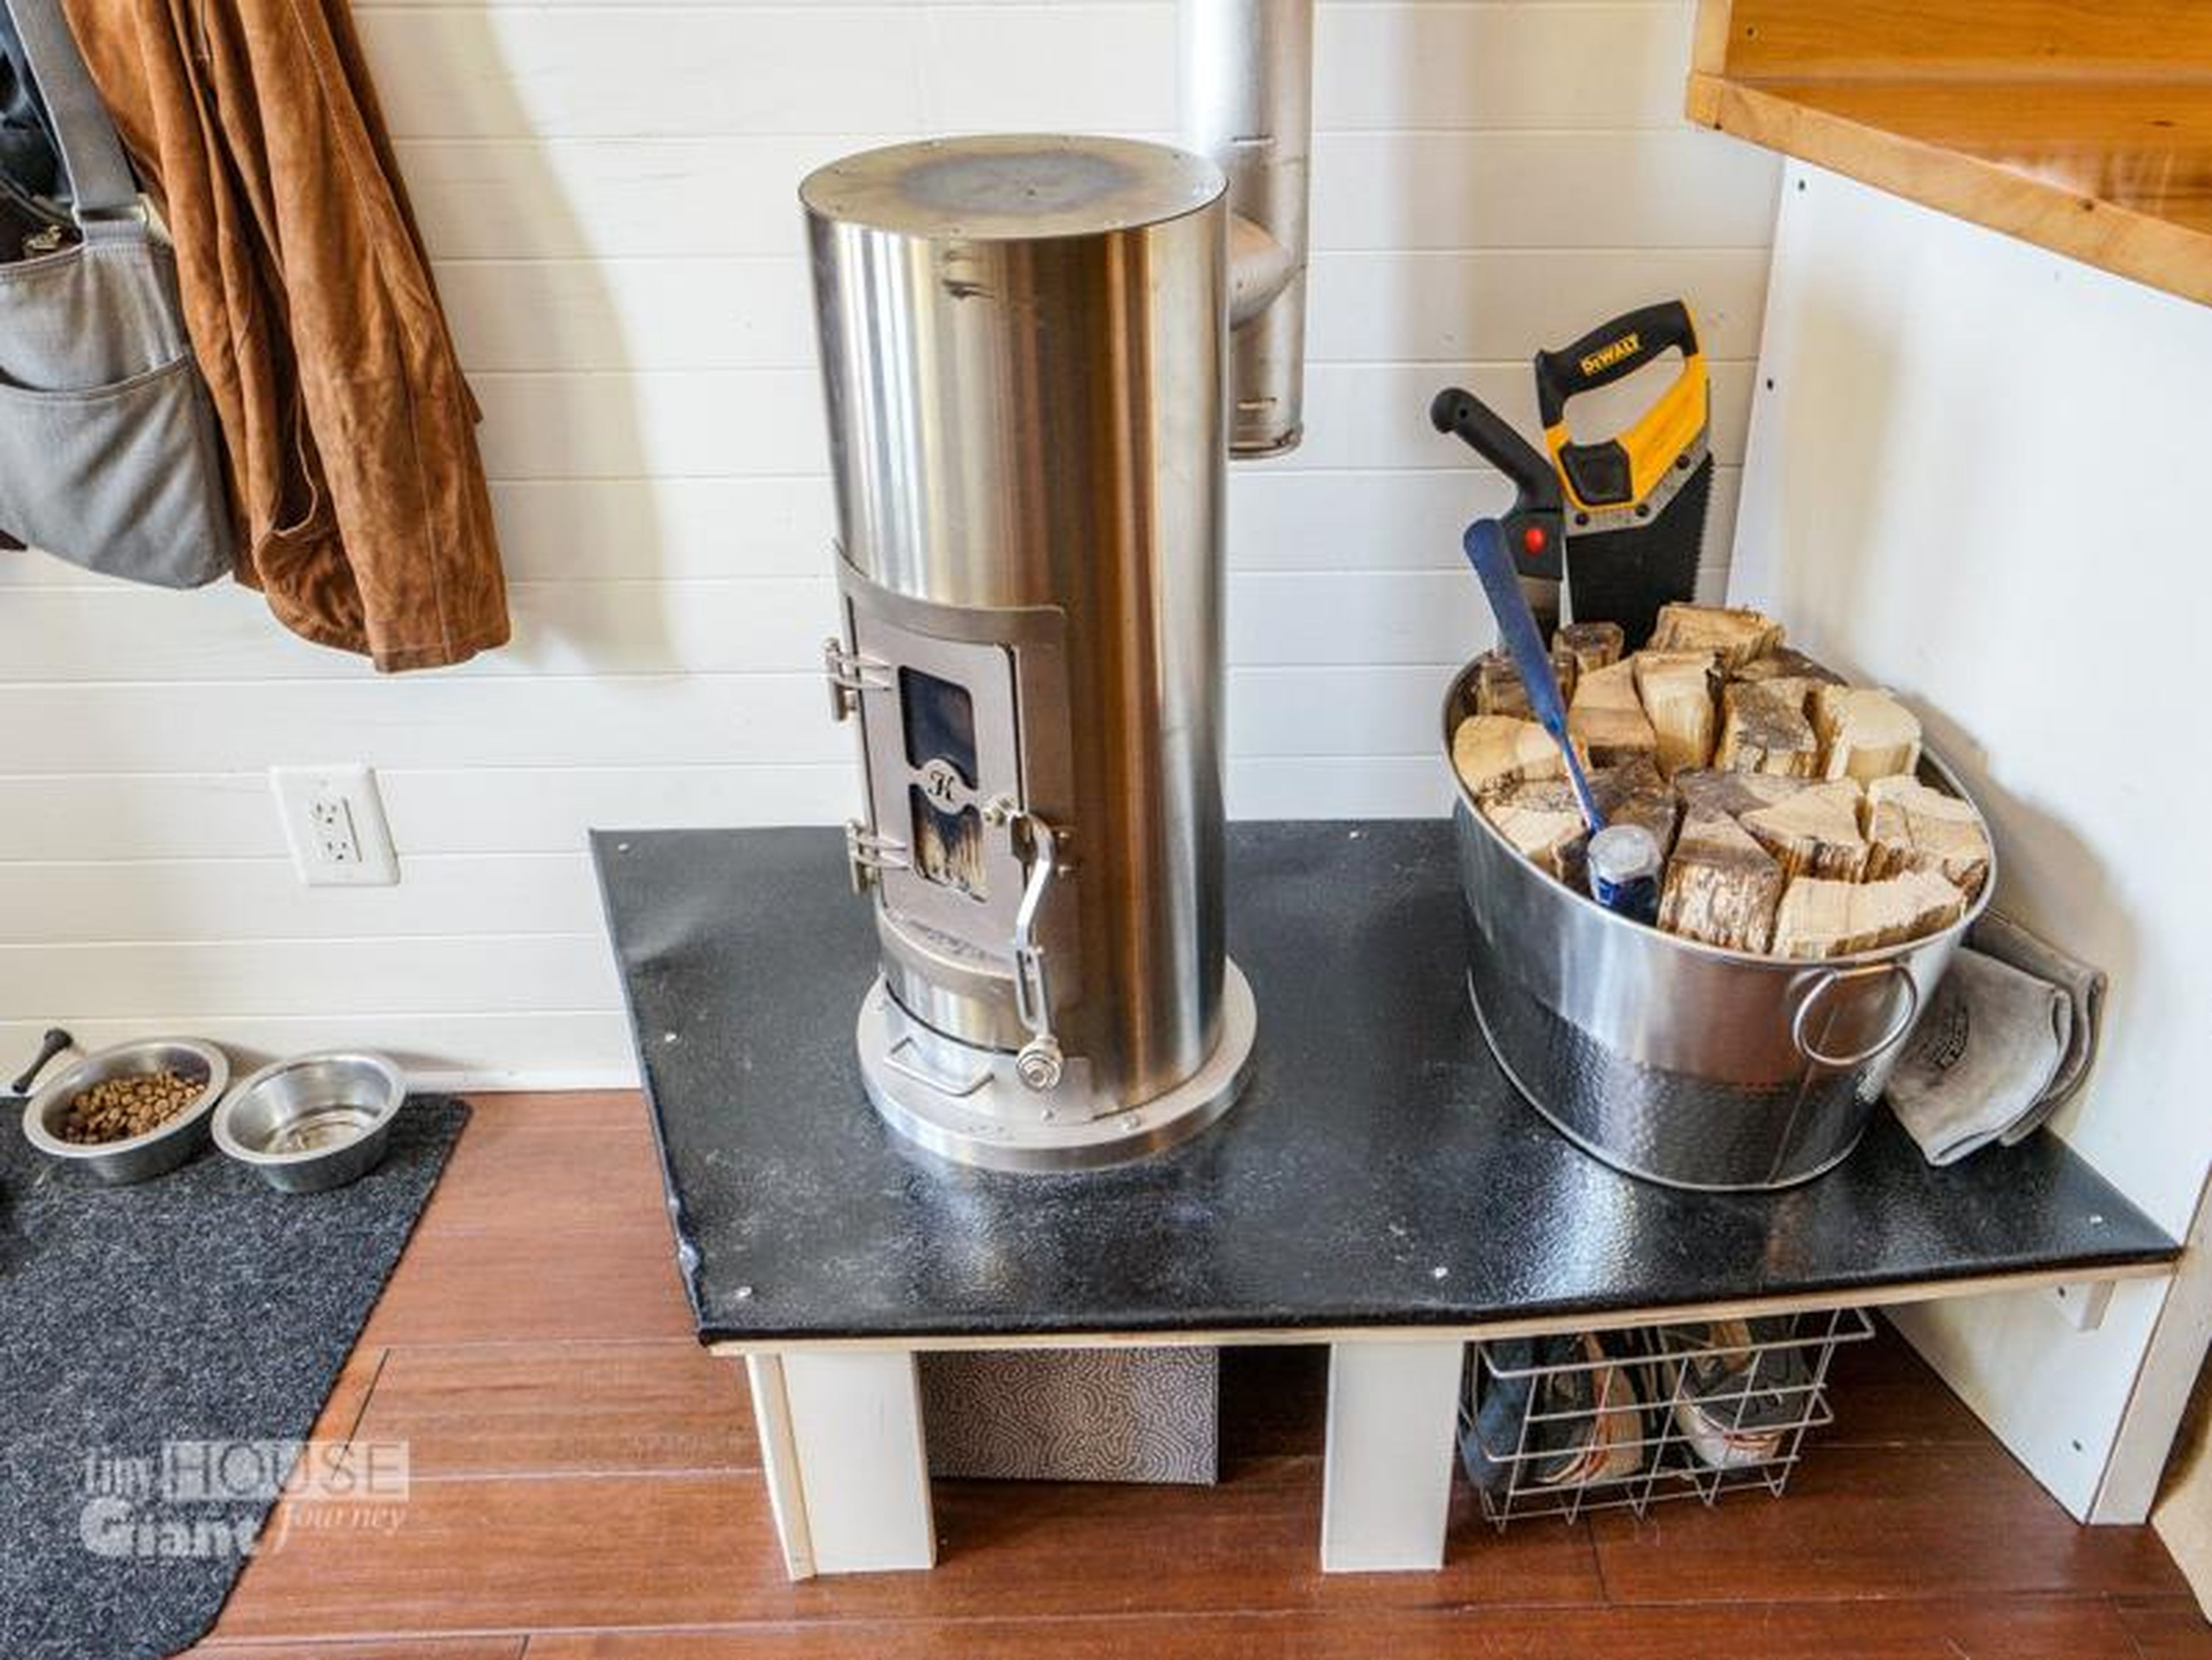 Your stove might look like this.